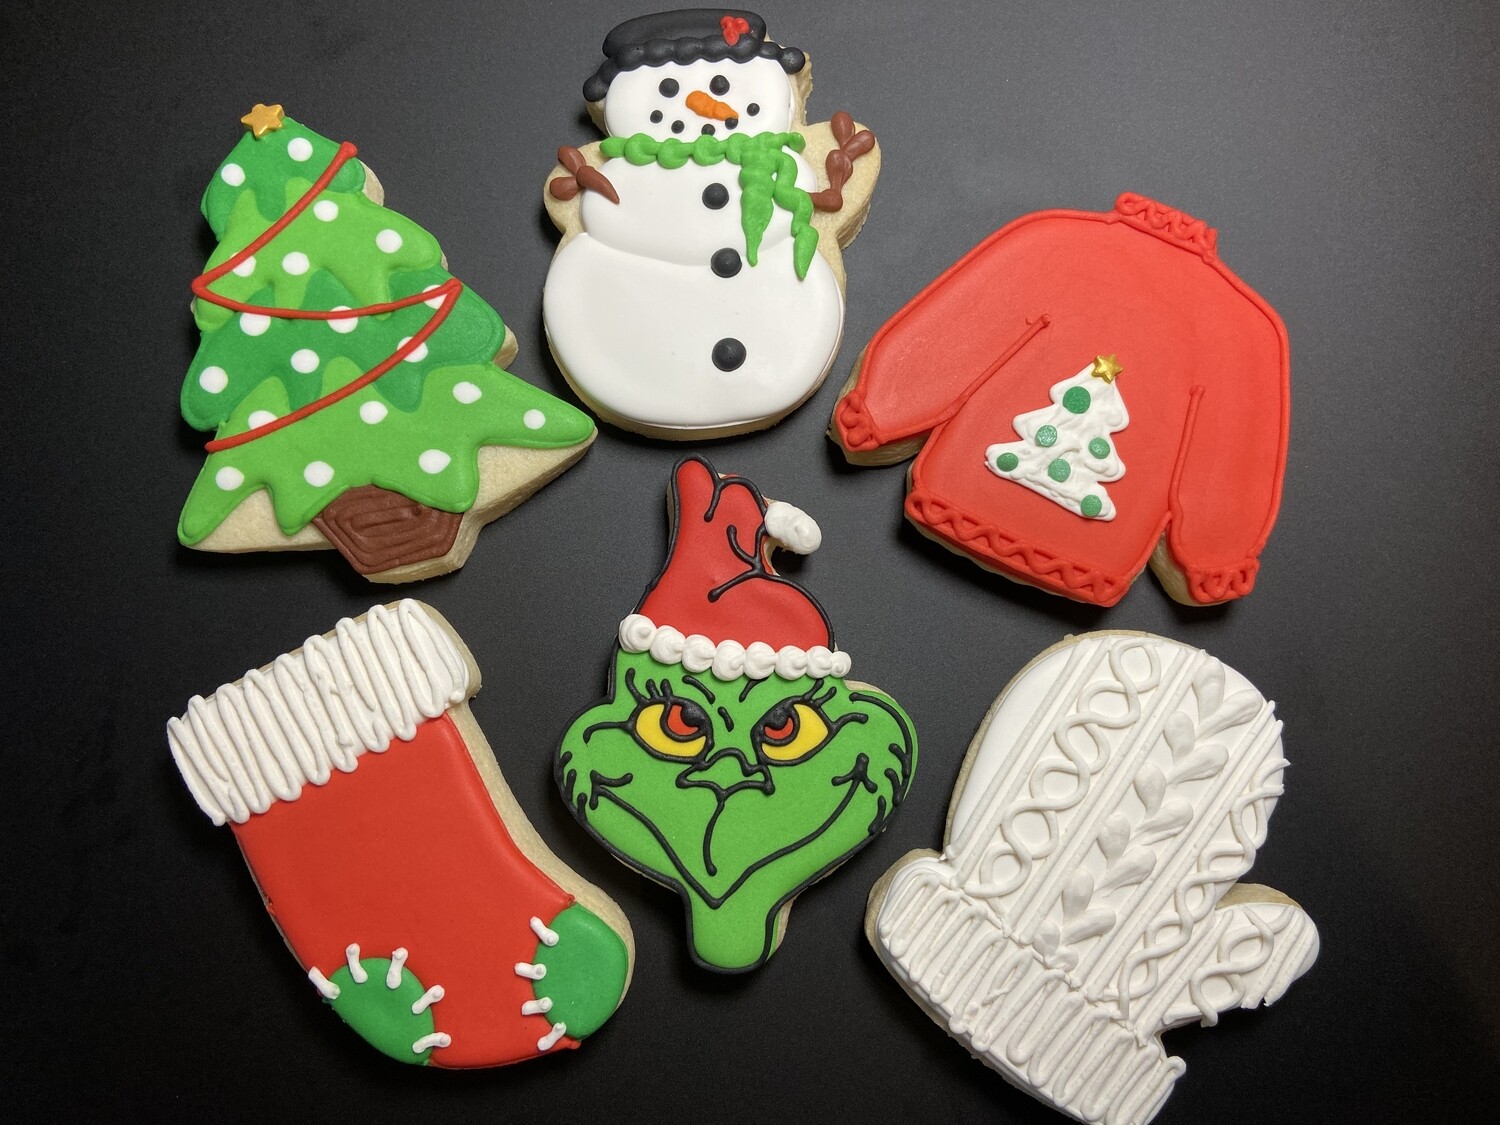 THE GRINCH (Tyler) Decorating Workshop - SATURDAY, DEC 3rd at 6:30 p.m.